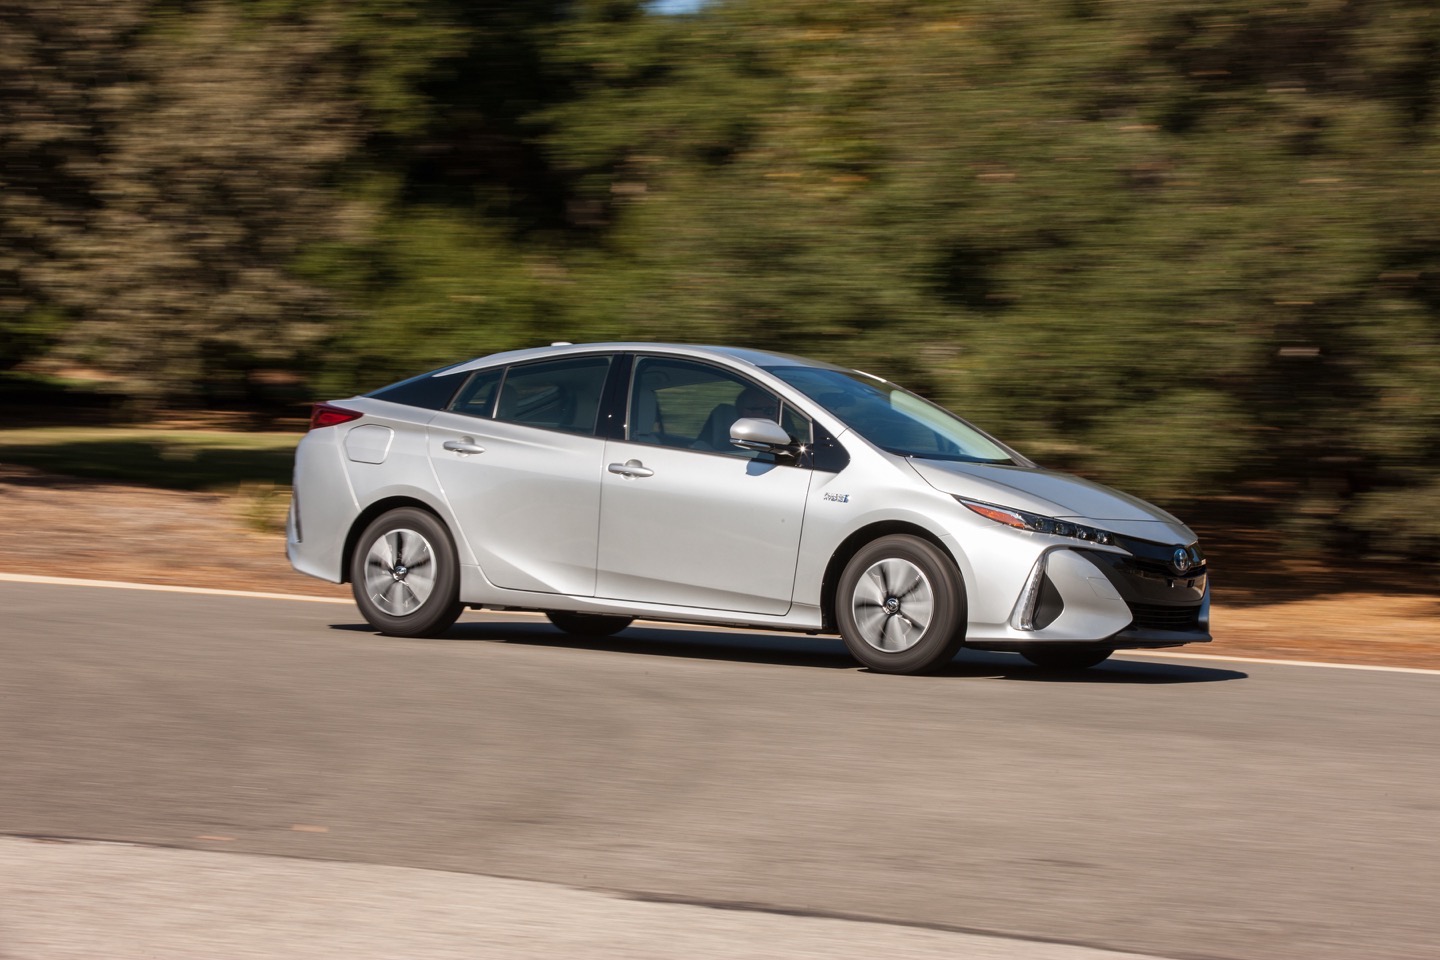 Toyota aims to electrify entire range by 2025